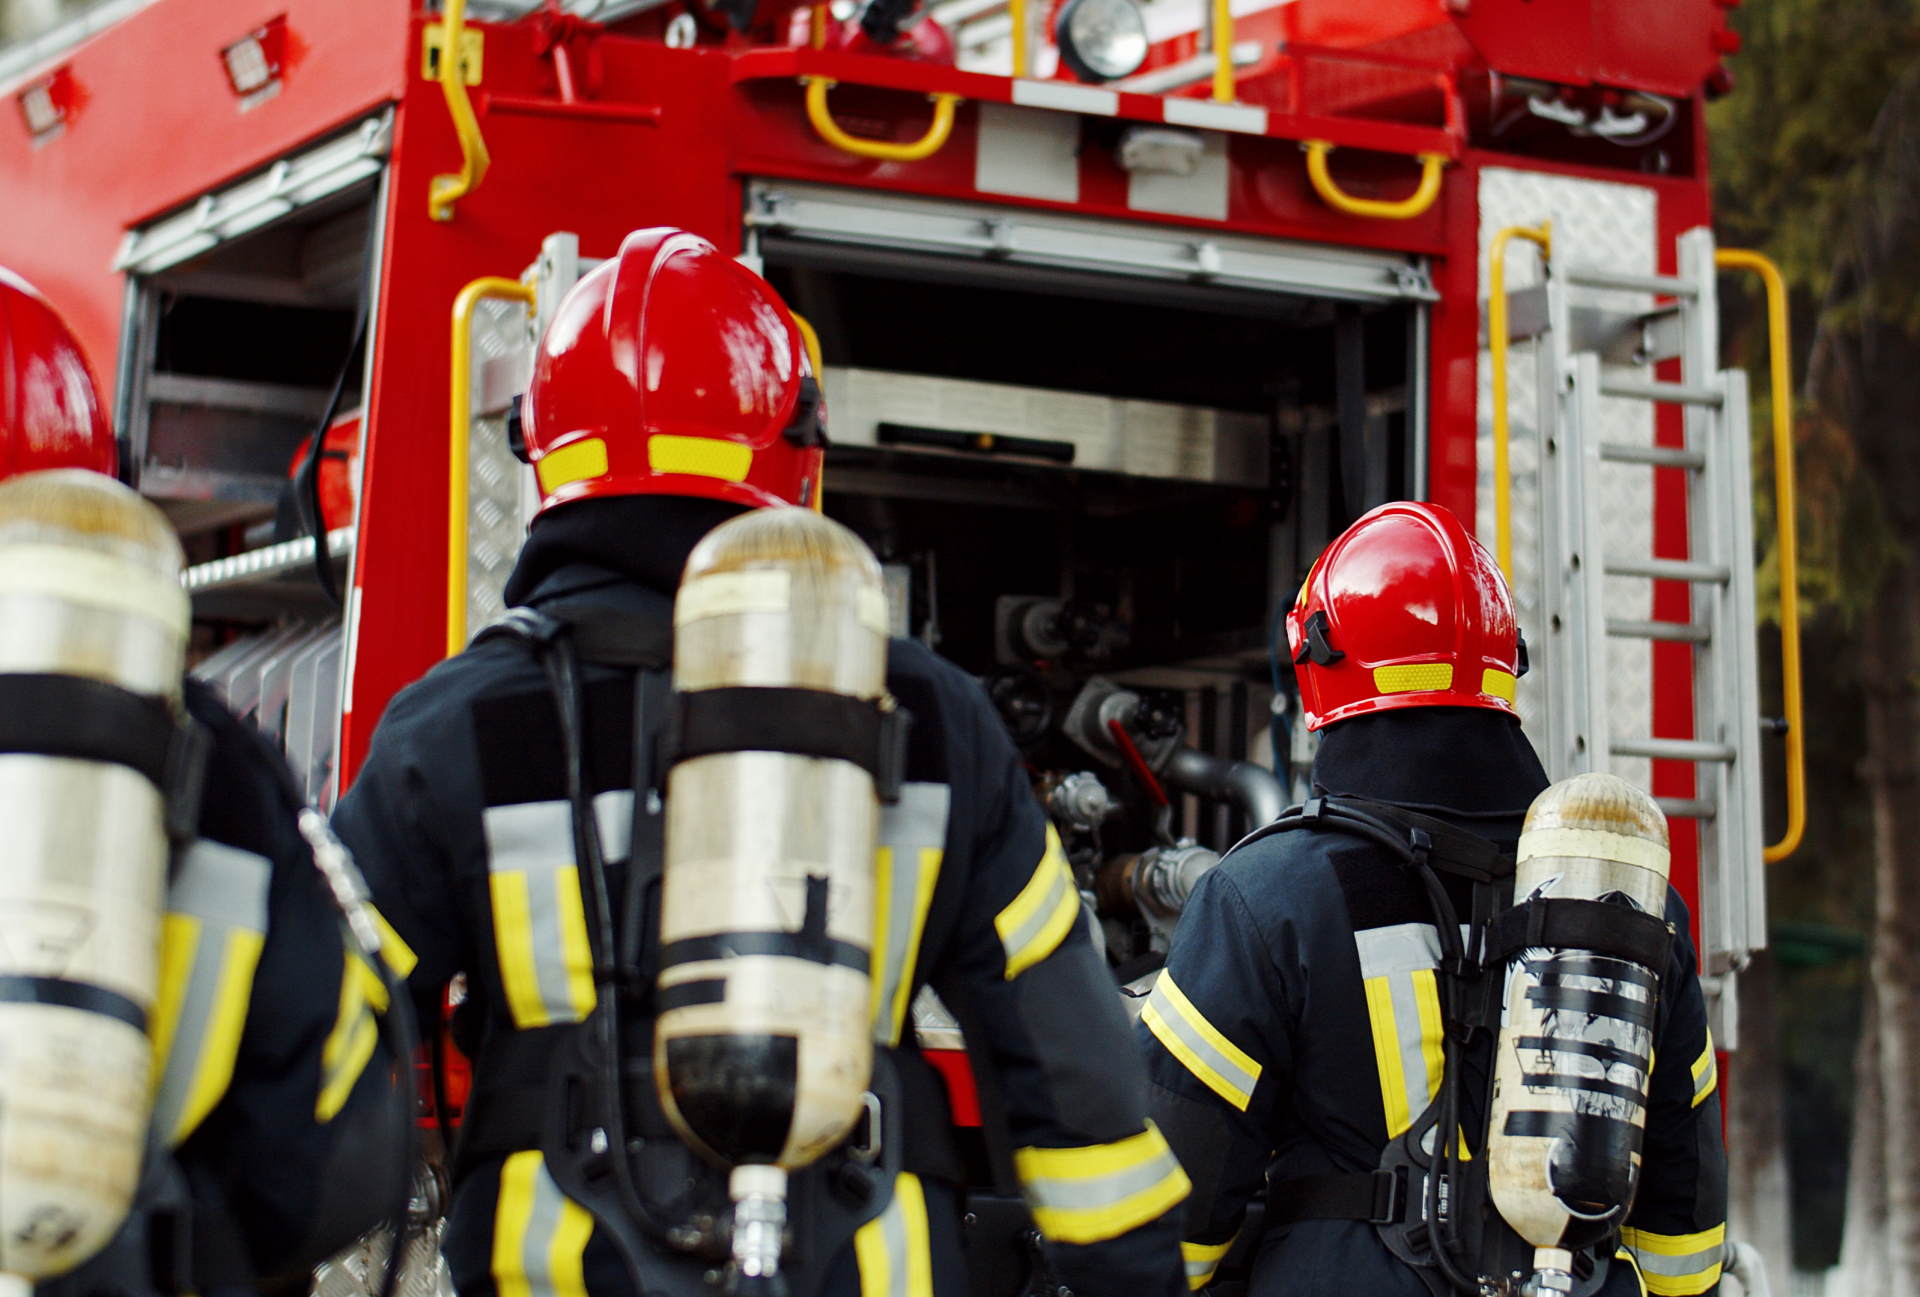 Our solutions for fire brigades